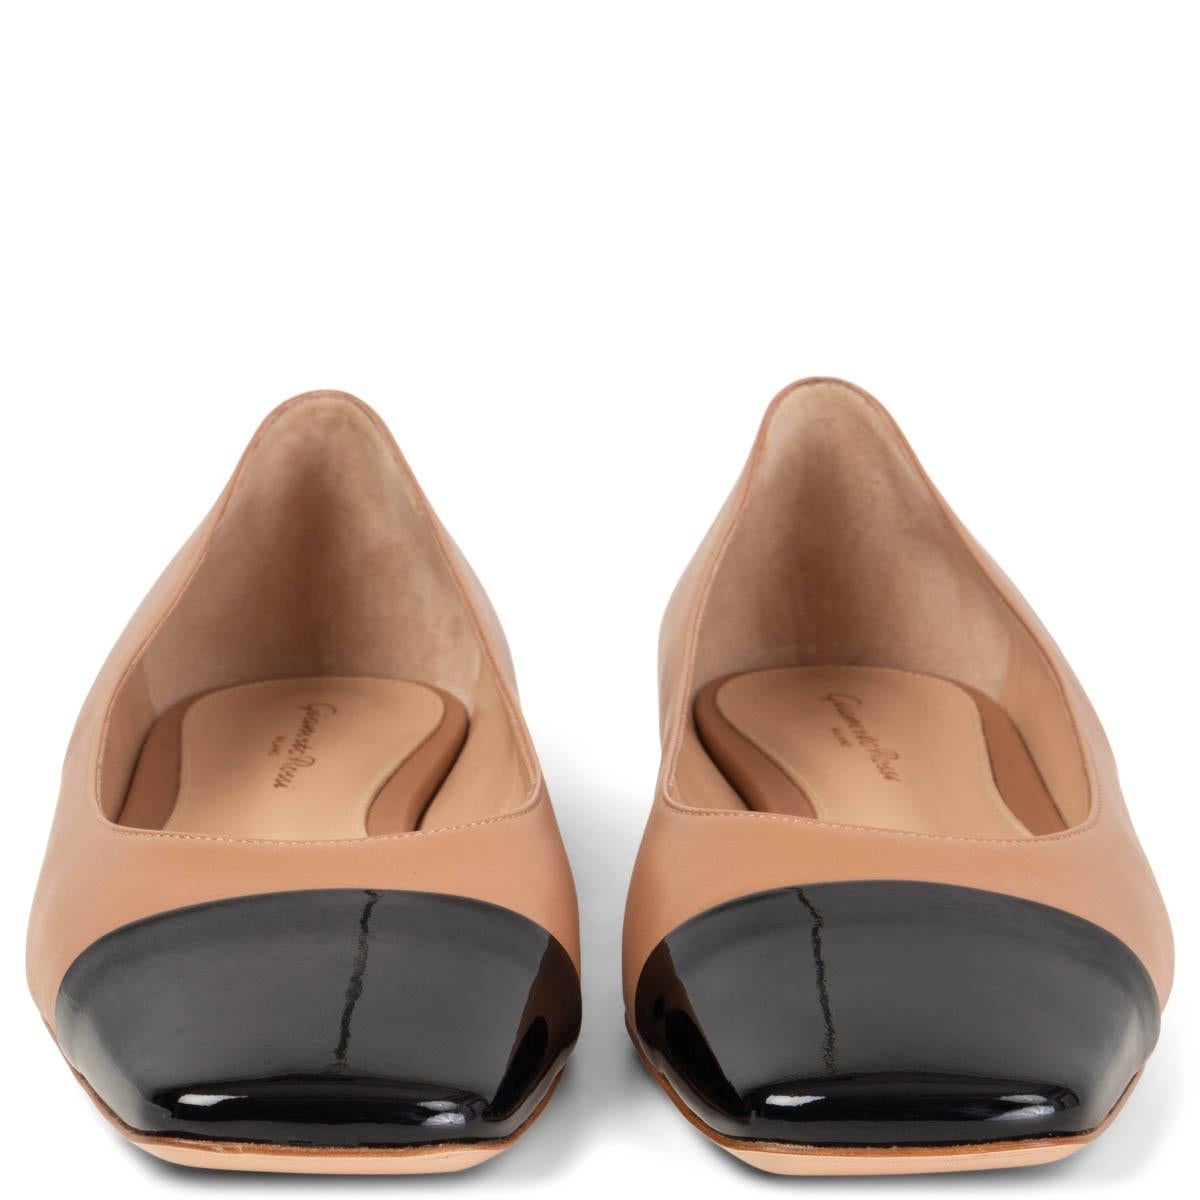 100% authentic Gianvito Rossi Ballet Flats with a square toe in tan leather with a black patent leather cap. Brand new. 

Measurements
Imprinted Size	42
Shoe Size	42
Inside Sole	28cm (10.9in)
Width	8.5cm (3.3in)
Heel	1cm (0.4in)

All our listings